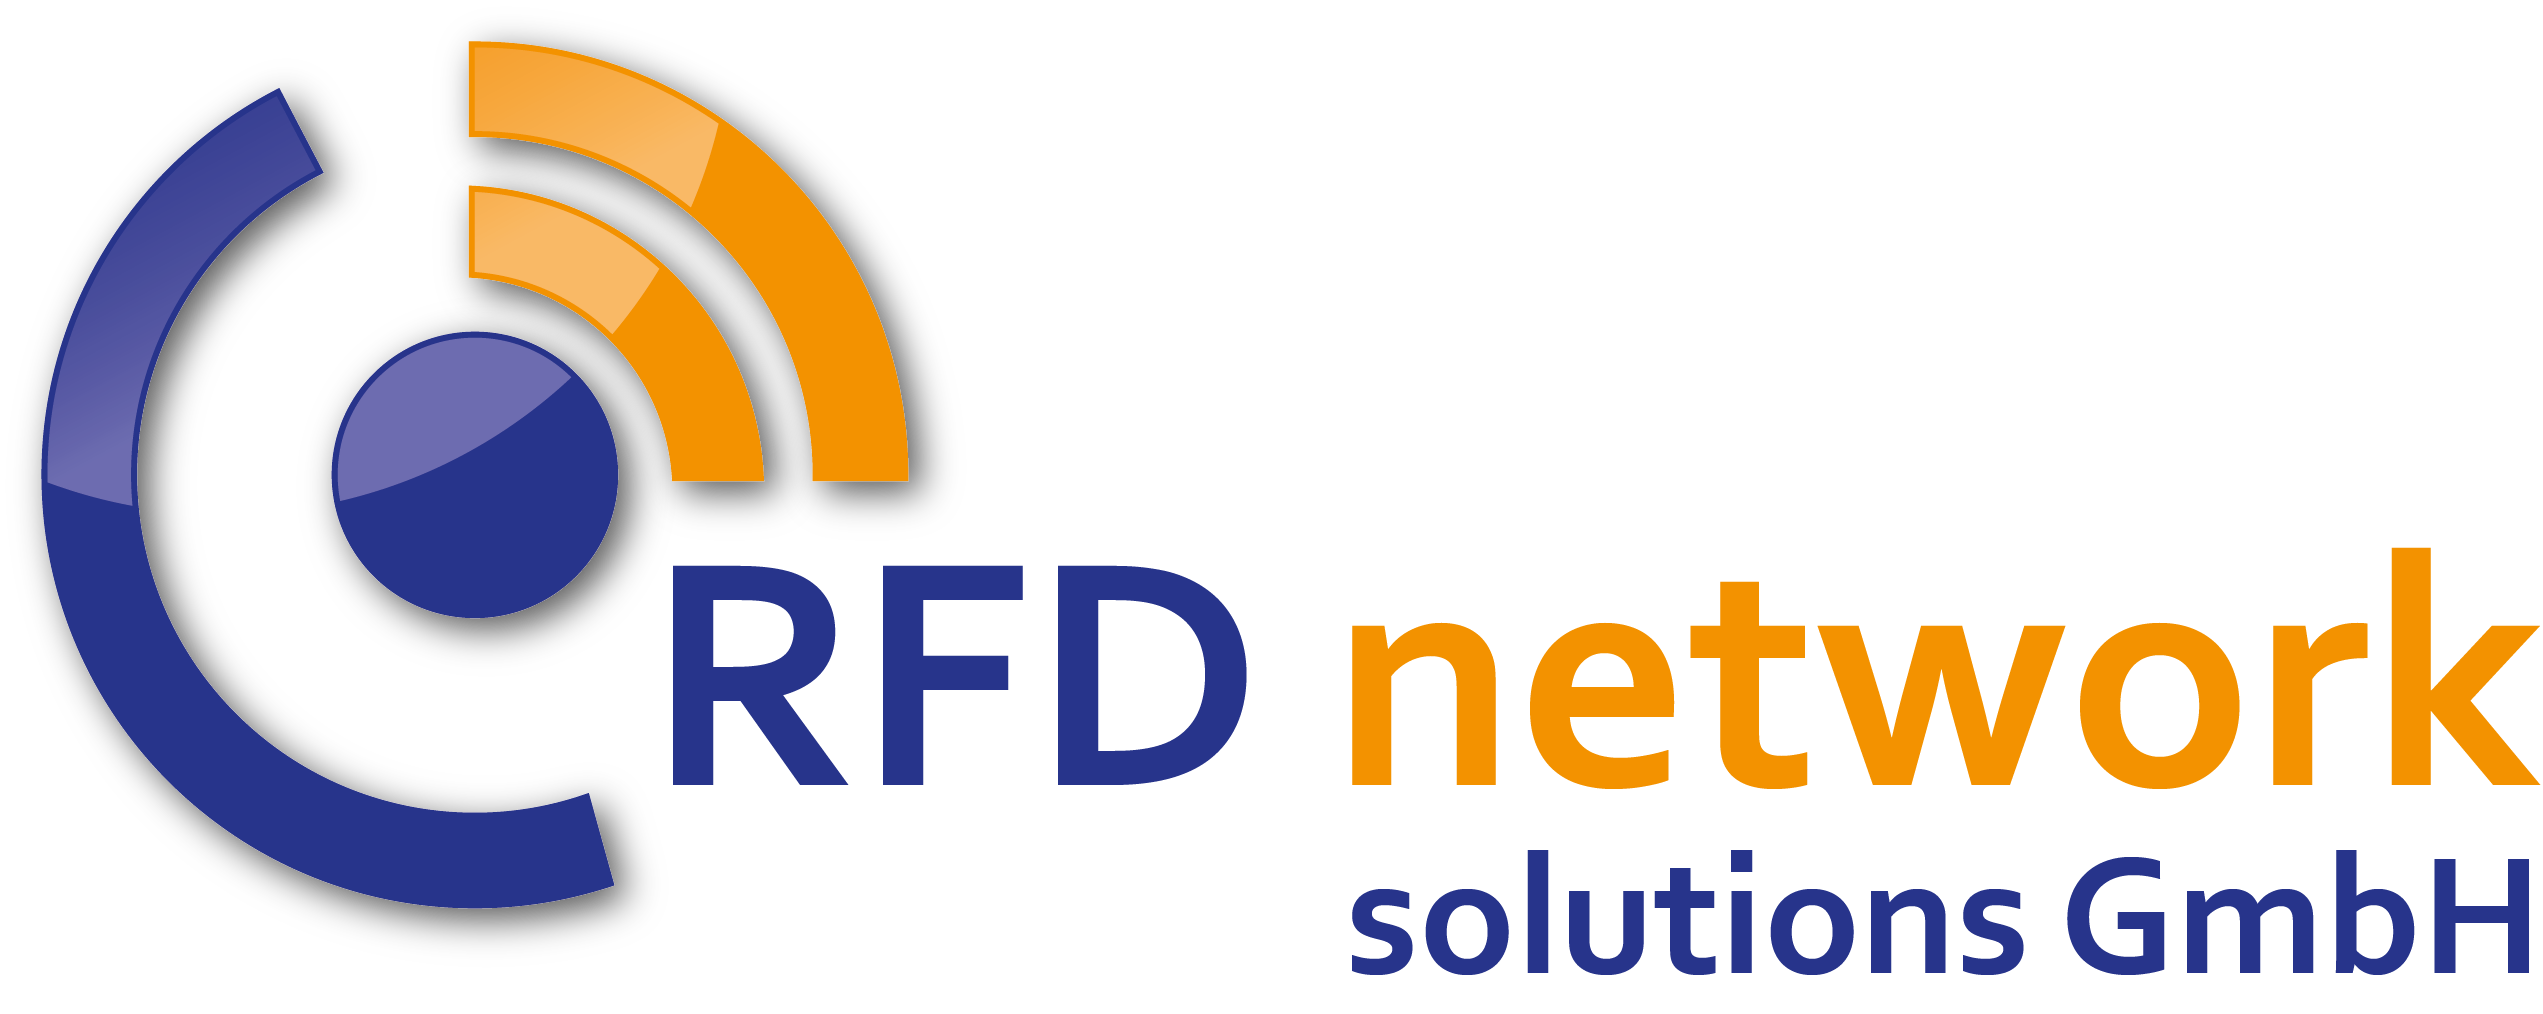 RFD network solutions GmbH